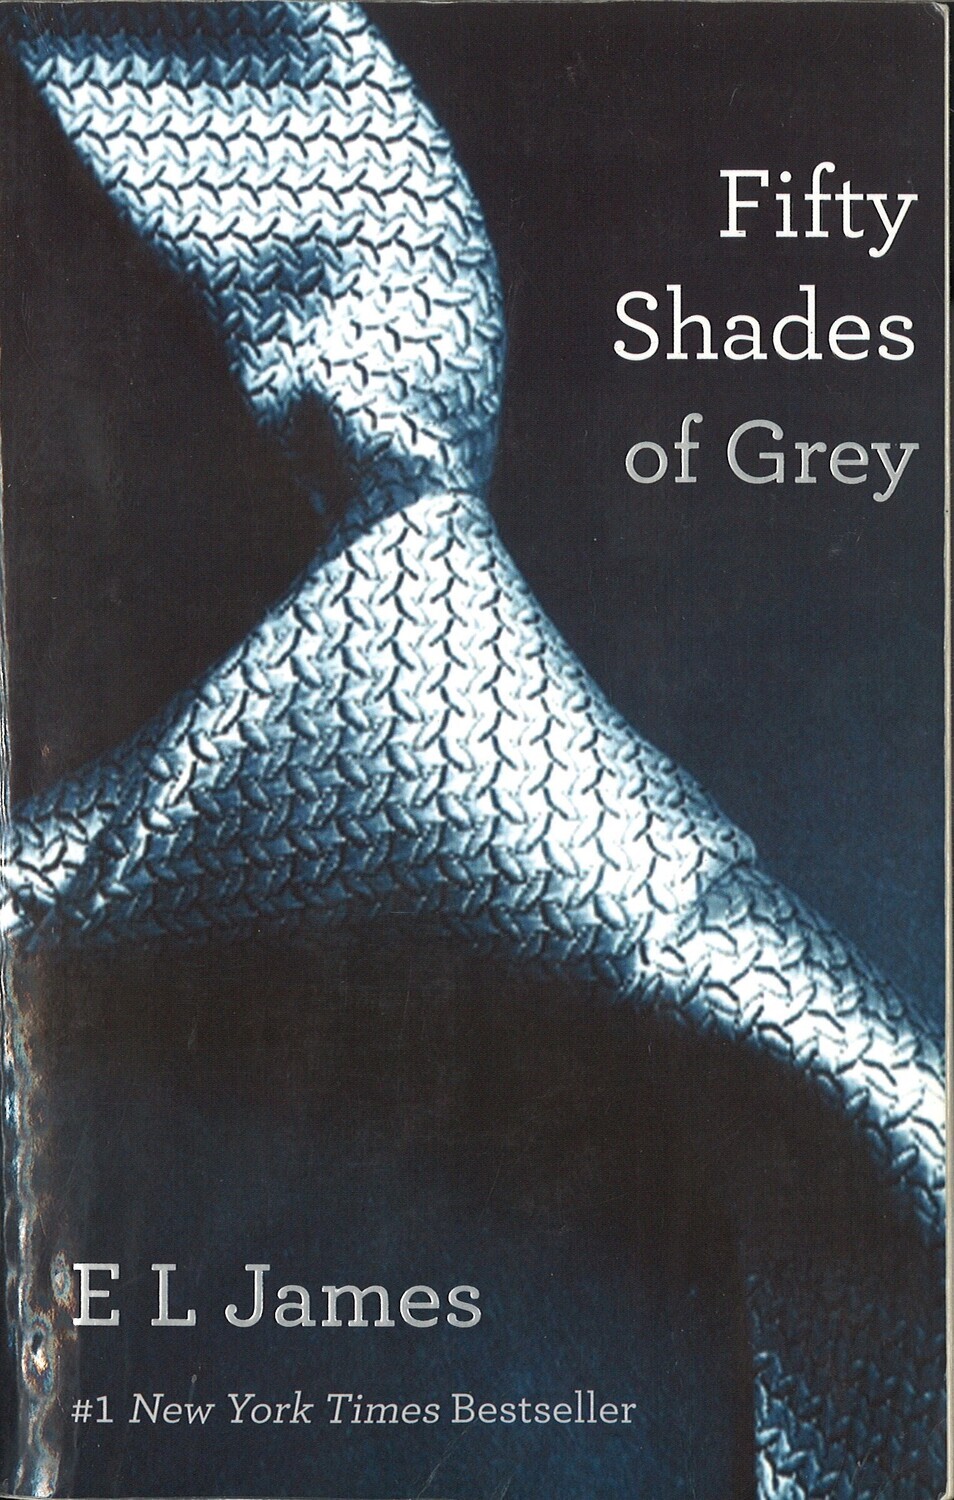 Fifty Shades of Grey (Book 1 of Fifty Shades Trilogy)